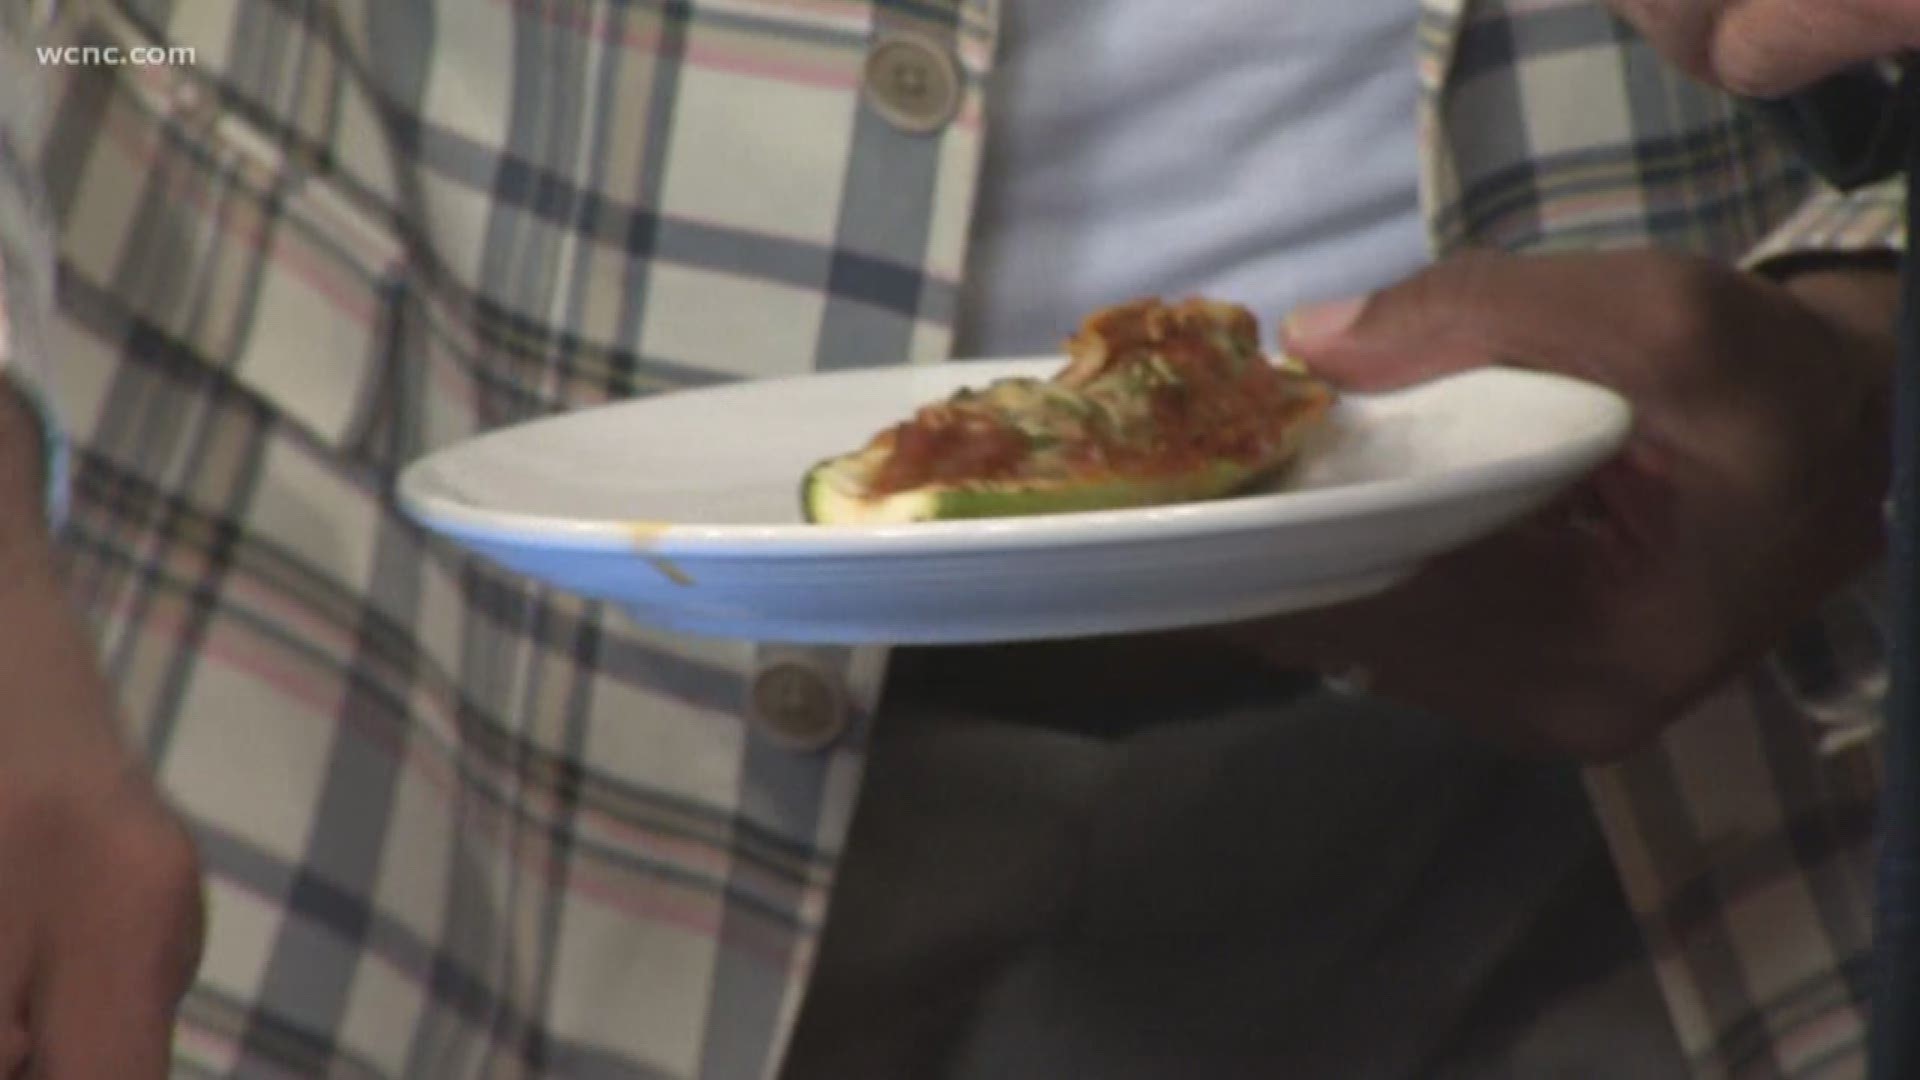 Andria Gaskins shows us how to make a delicious week night meal that utilizes zucchini in a fun way.